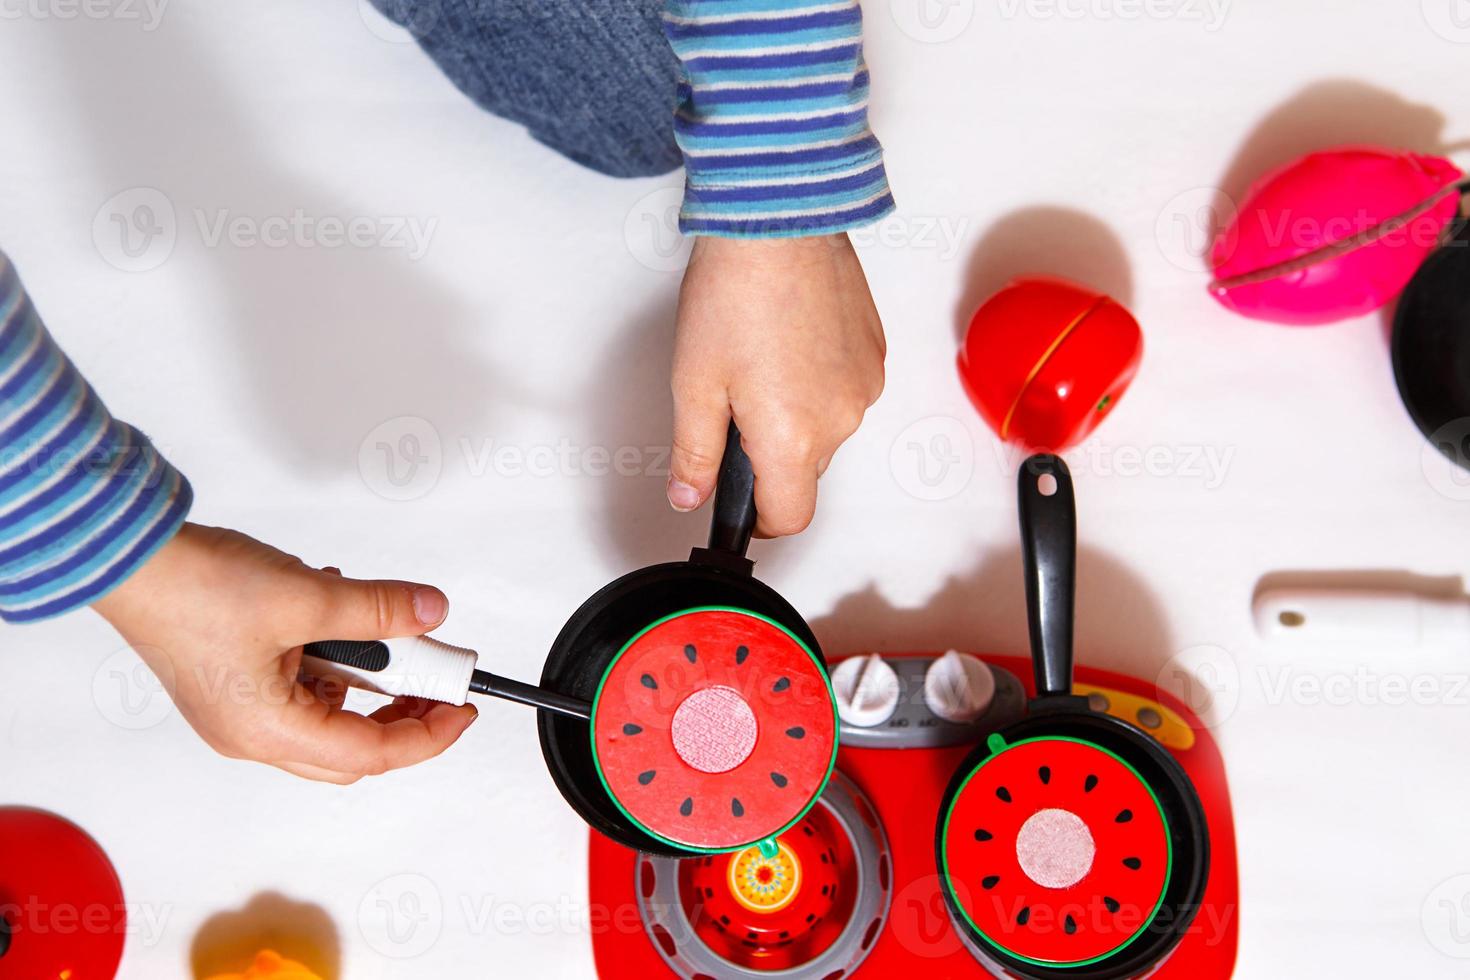 The child plays with sliced plastic vegetables and fruits with Velcro, cooks food on a toy stove in a bowl. Children's cooking, a girl learns to cook. White background, close-up, concept. photo